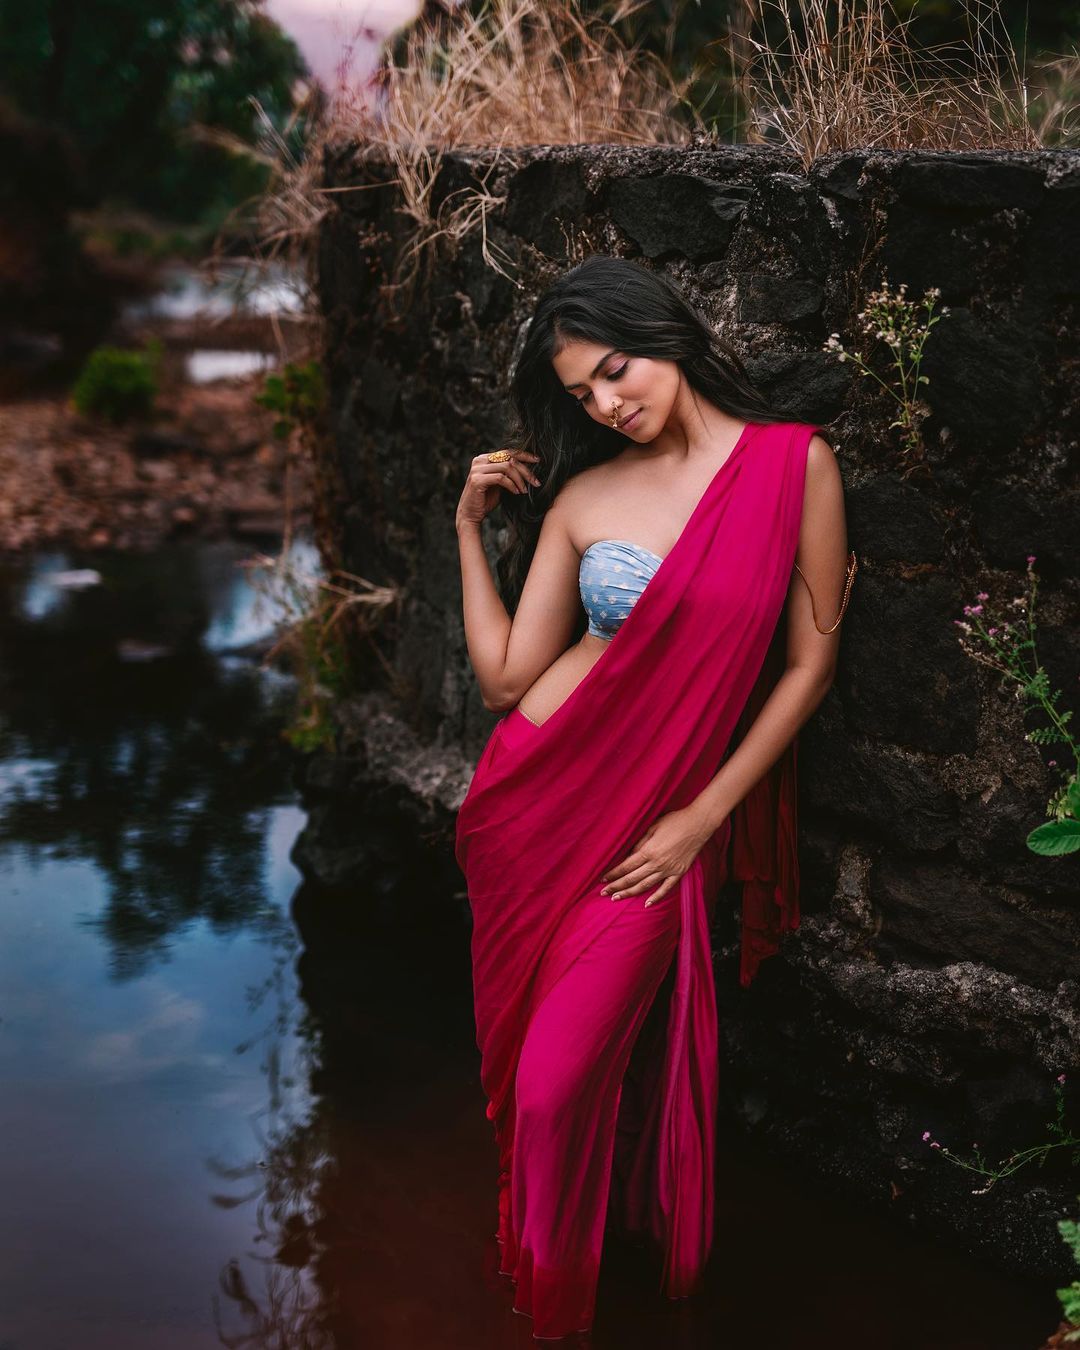 Malavika Mohanan looks straight out of a fairytale in THIS photo!